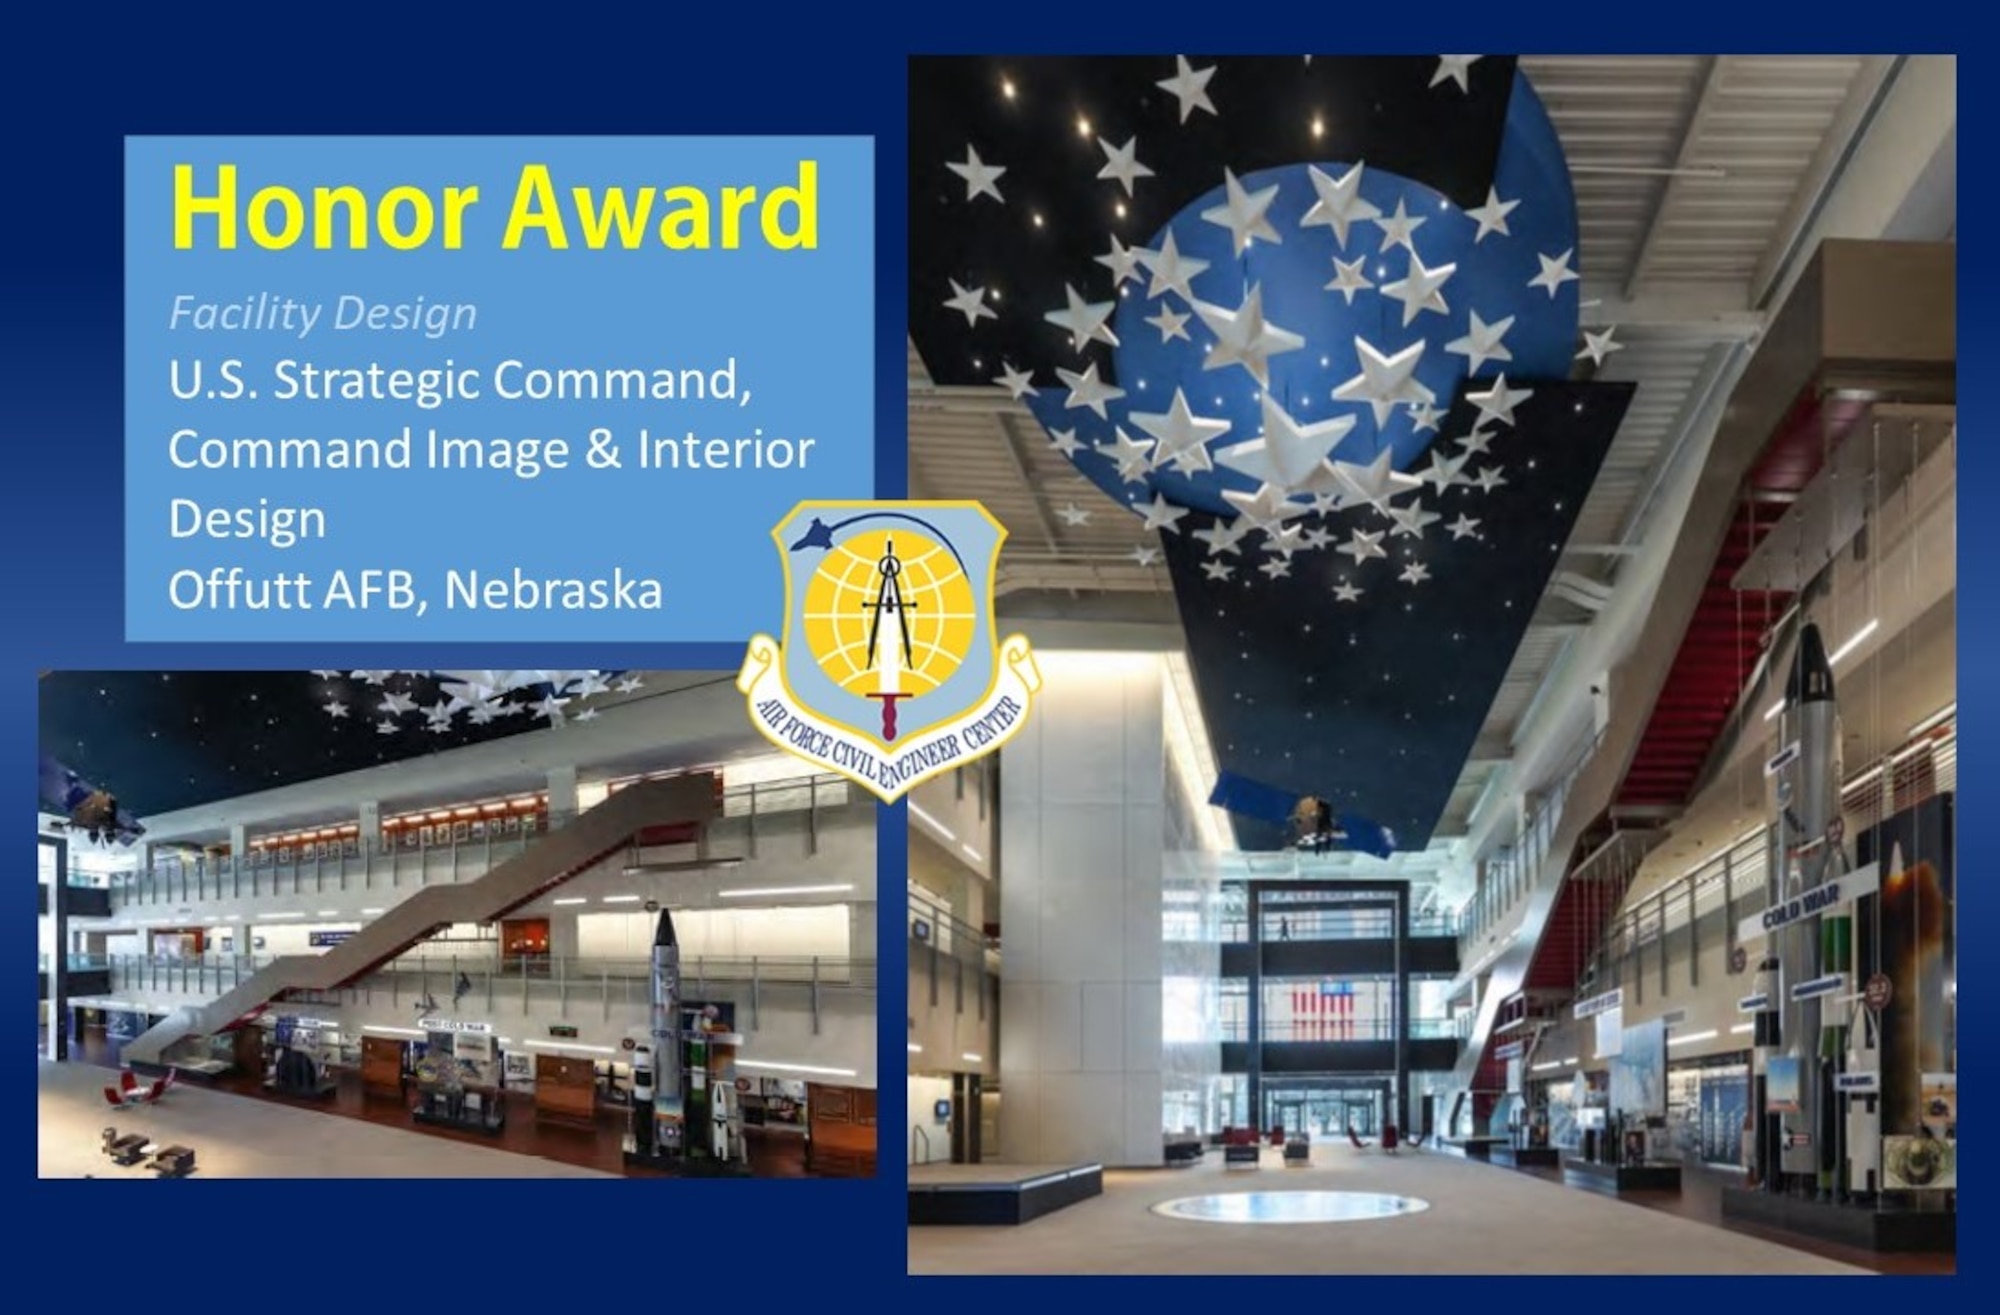 2020 Design Honor Award in the facility design category is the U.S. Strategic Command, Command Image and Interior Design at Offutt AFB, Nebraska. (U.S. Air Force graphic)